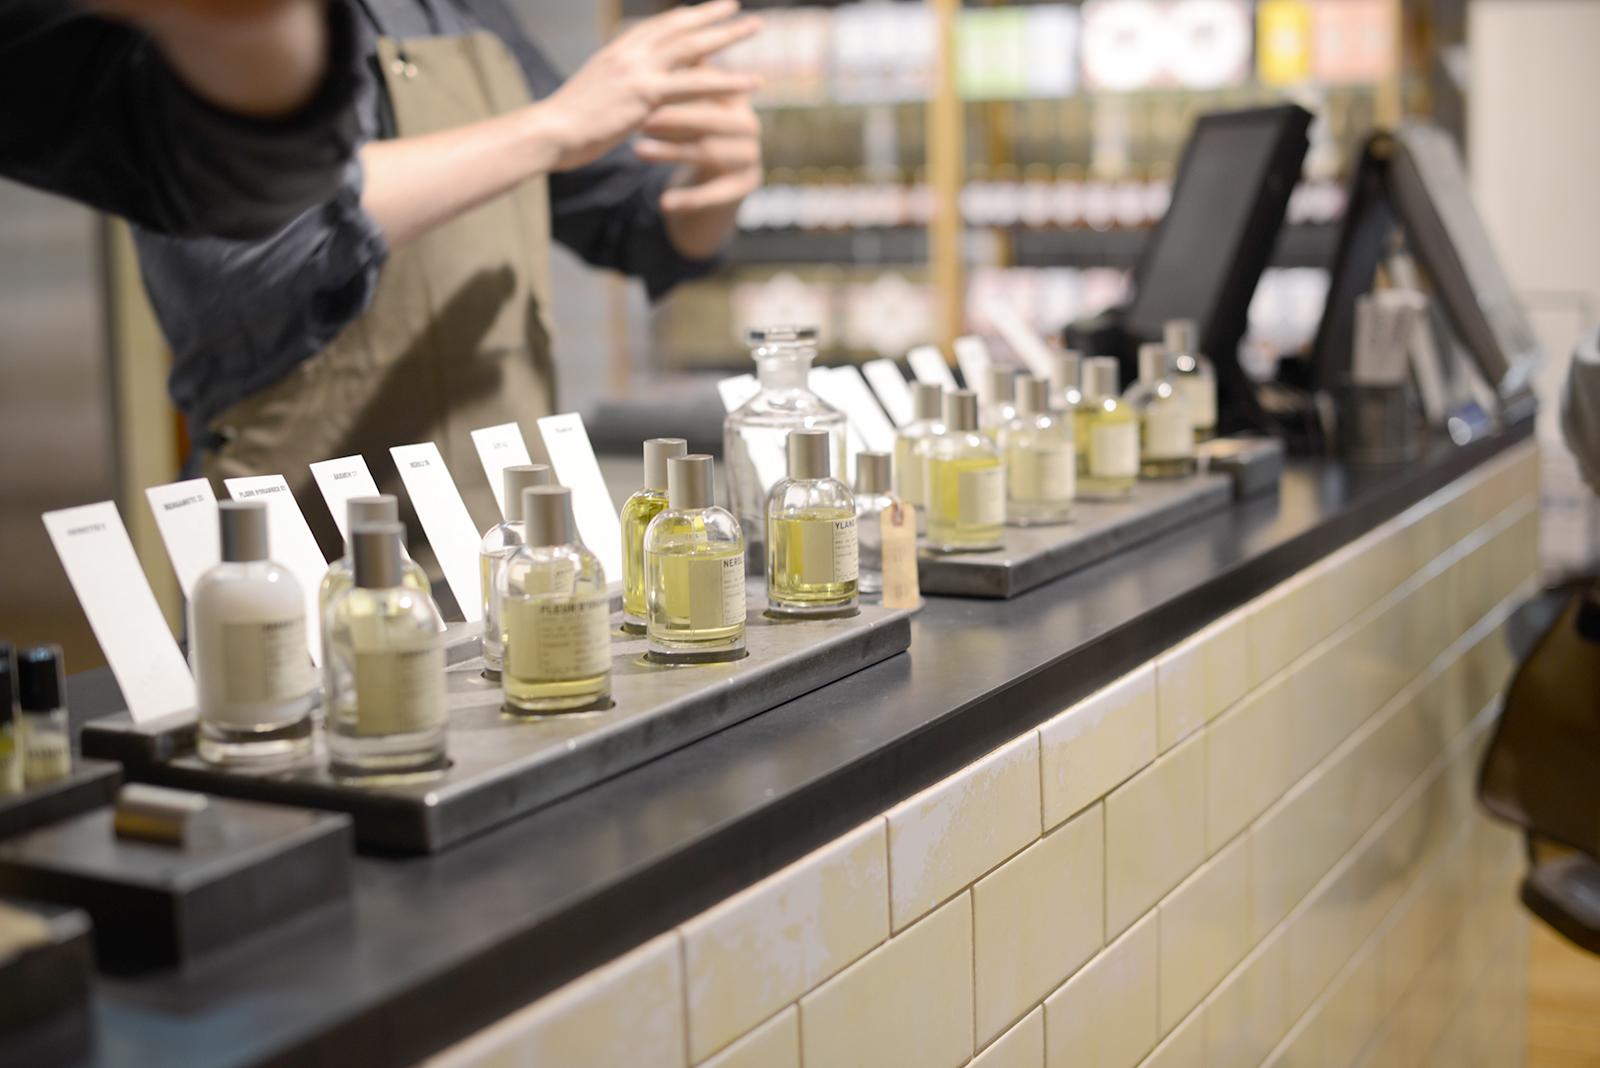 Le Labo perfume at Liberty London - Notes From A Stylist